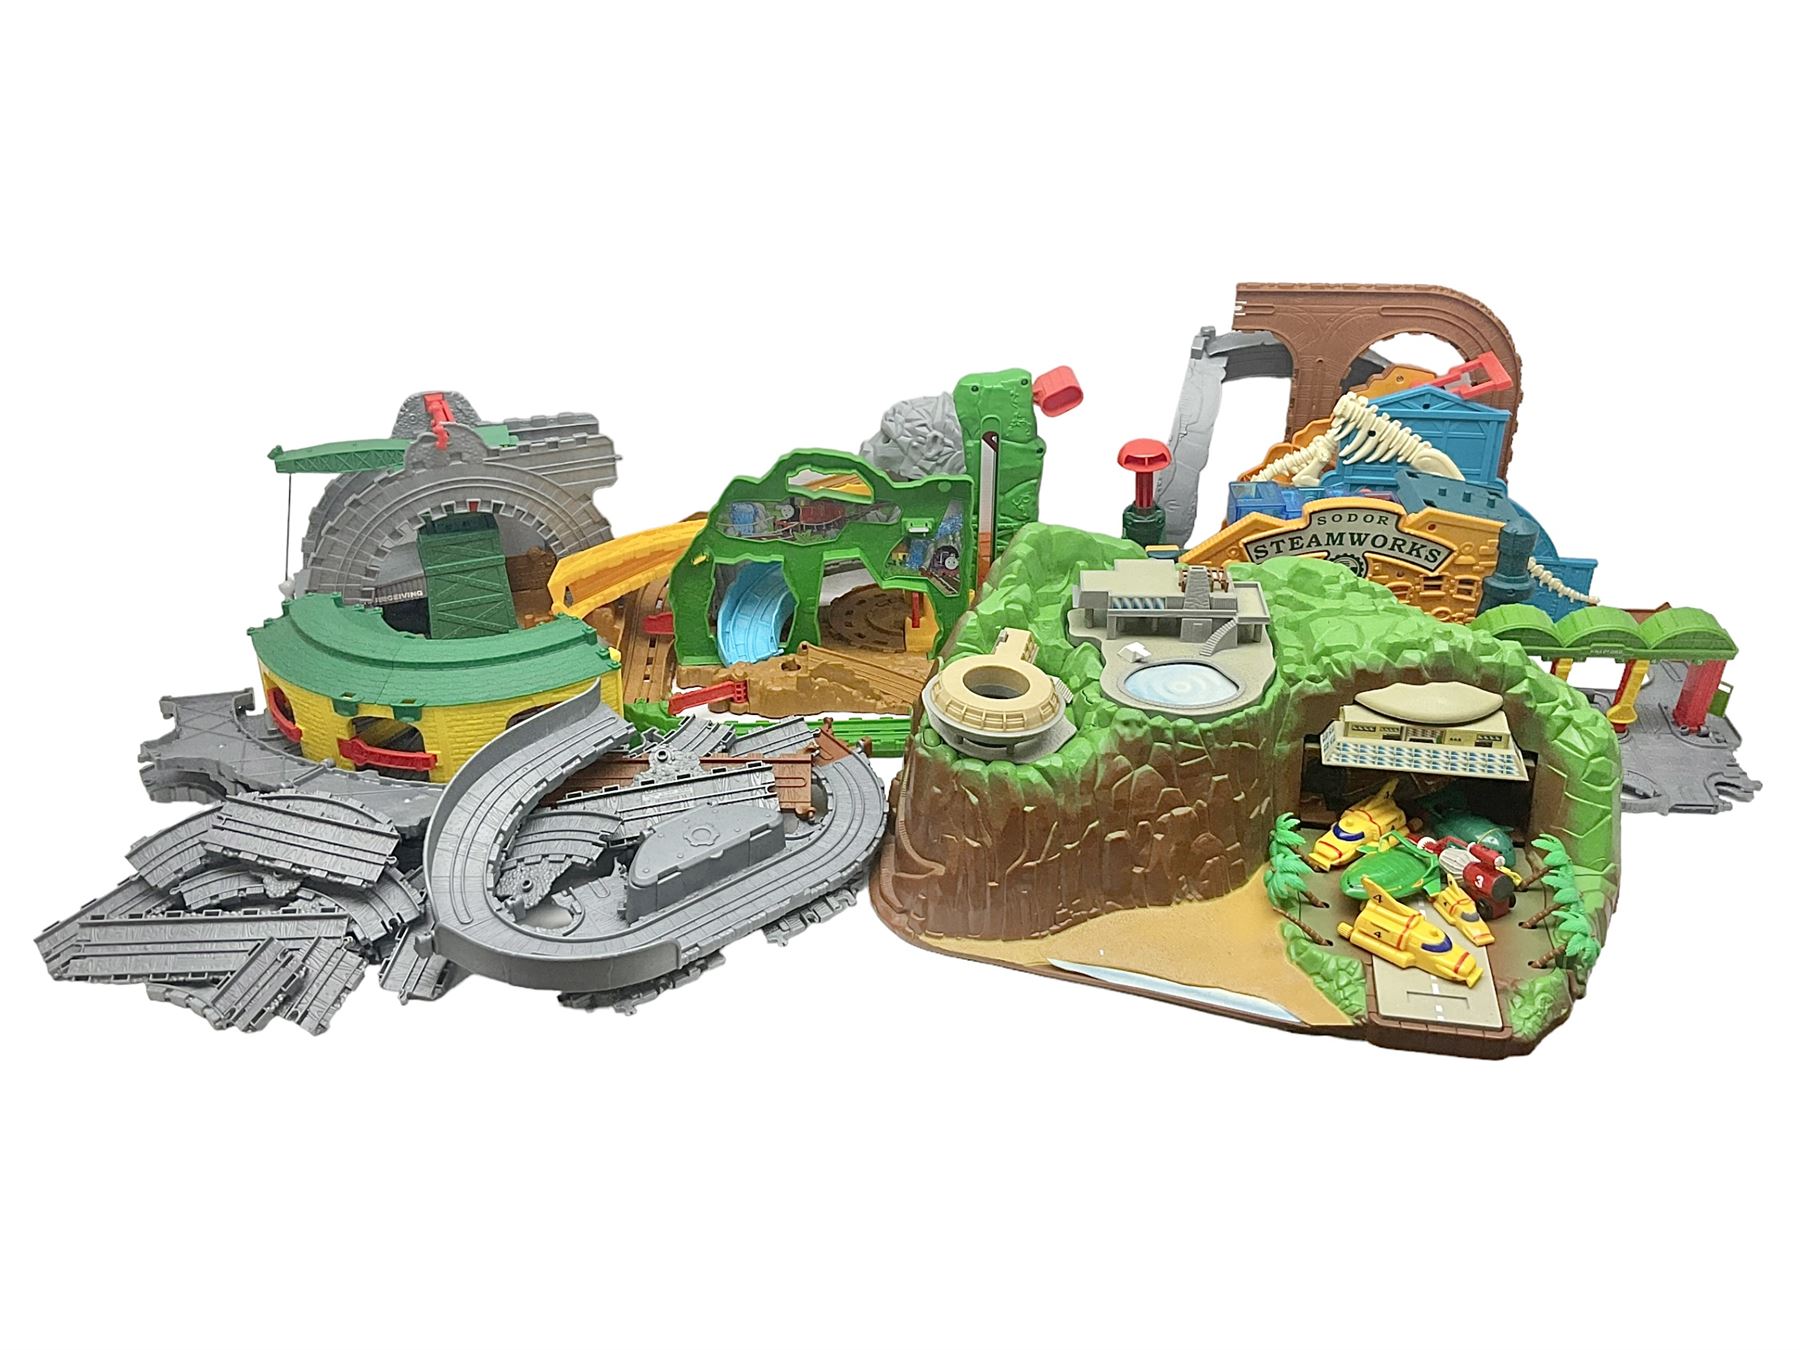 Quantity of Thomas the Tank Engine playsets and track